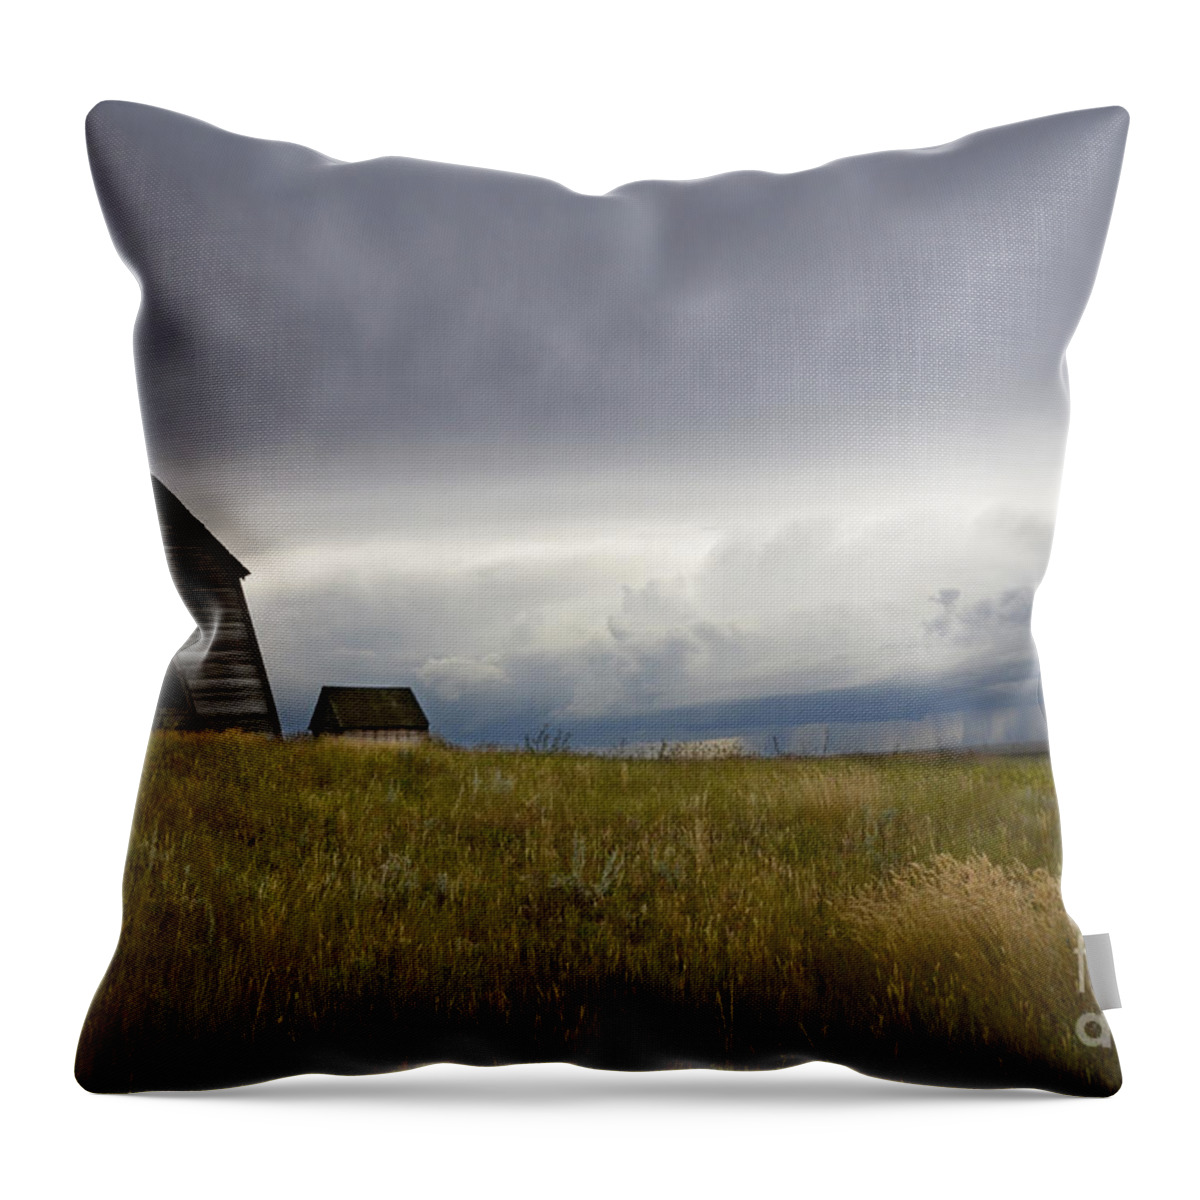 Homestead Throw Pillow featuring the photograph Little Remains by Bob Christopher